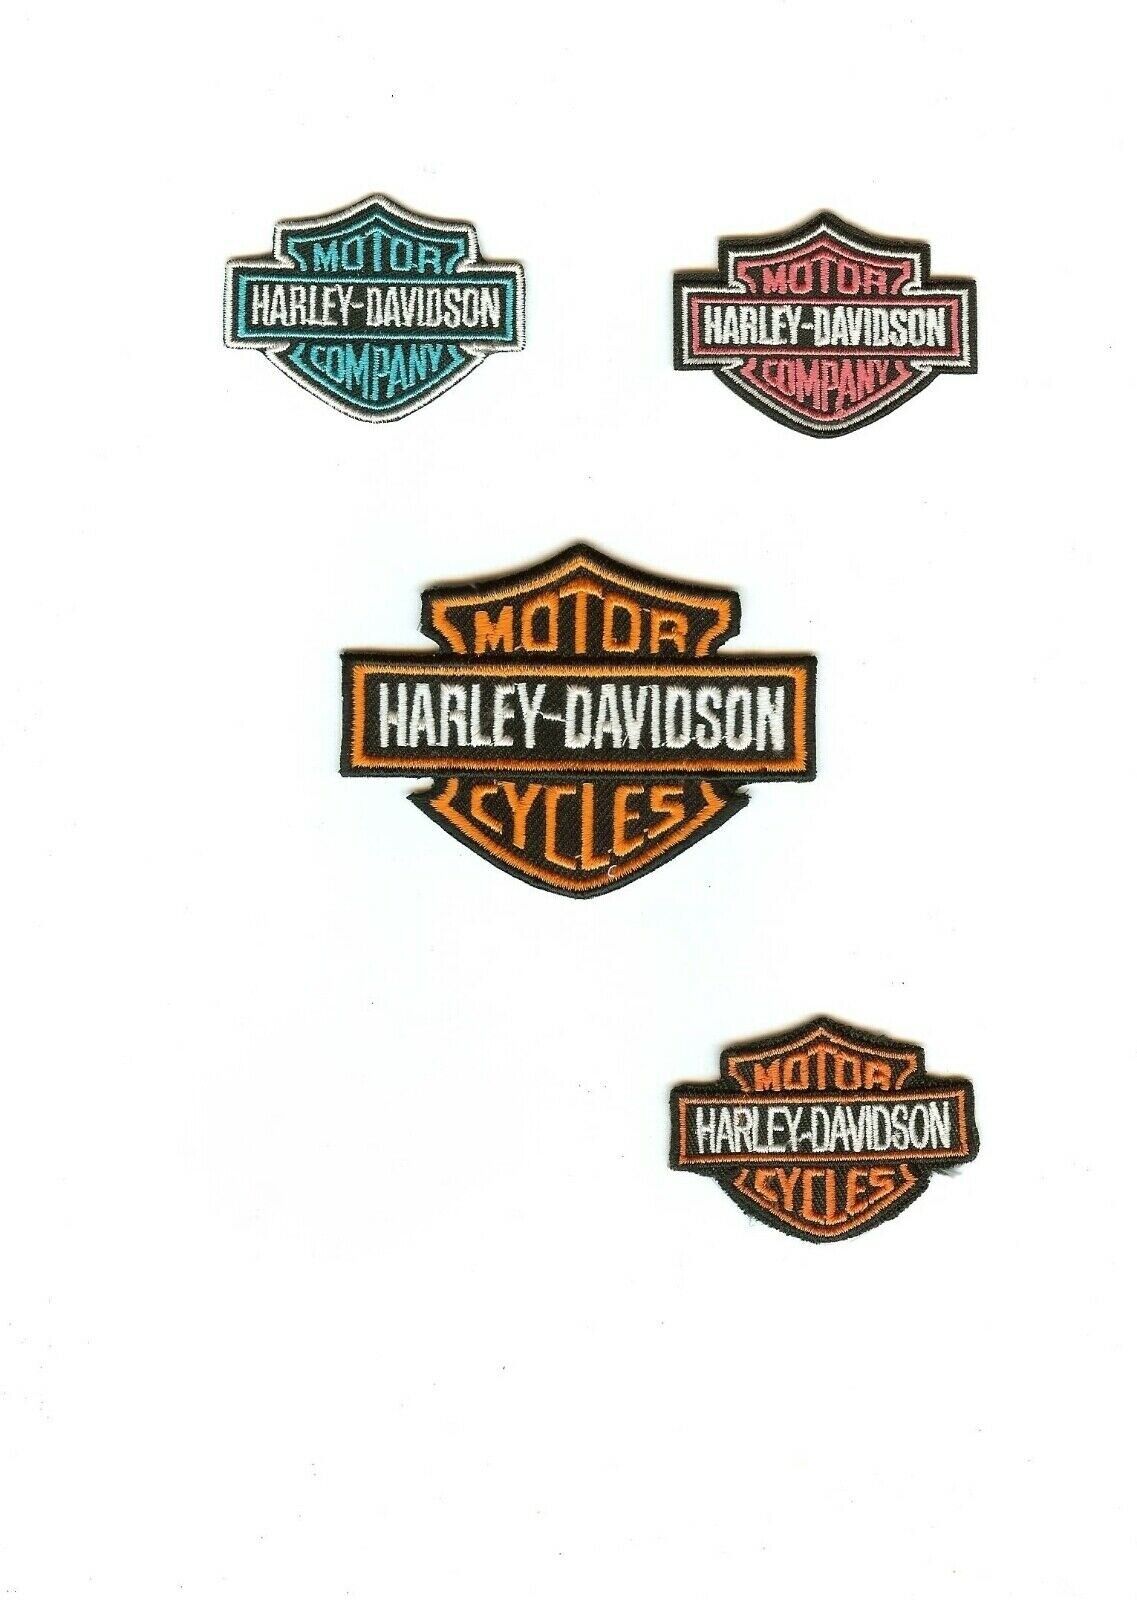 4 Harley Davidson Patches.MINT.Variety Pack.Fast same day Shipping.